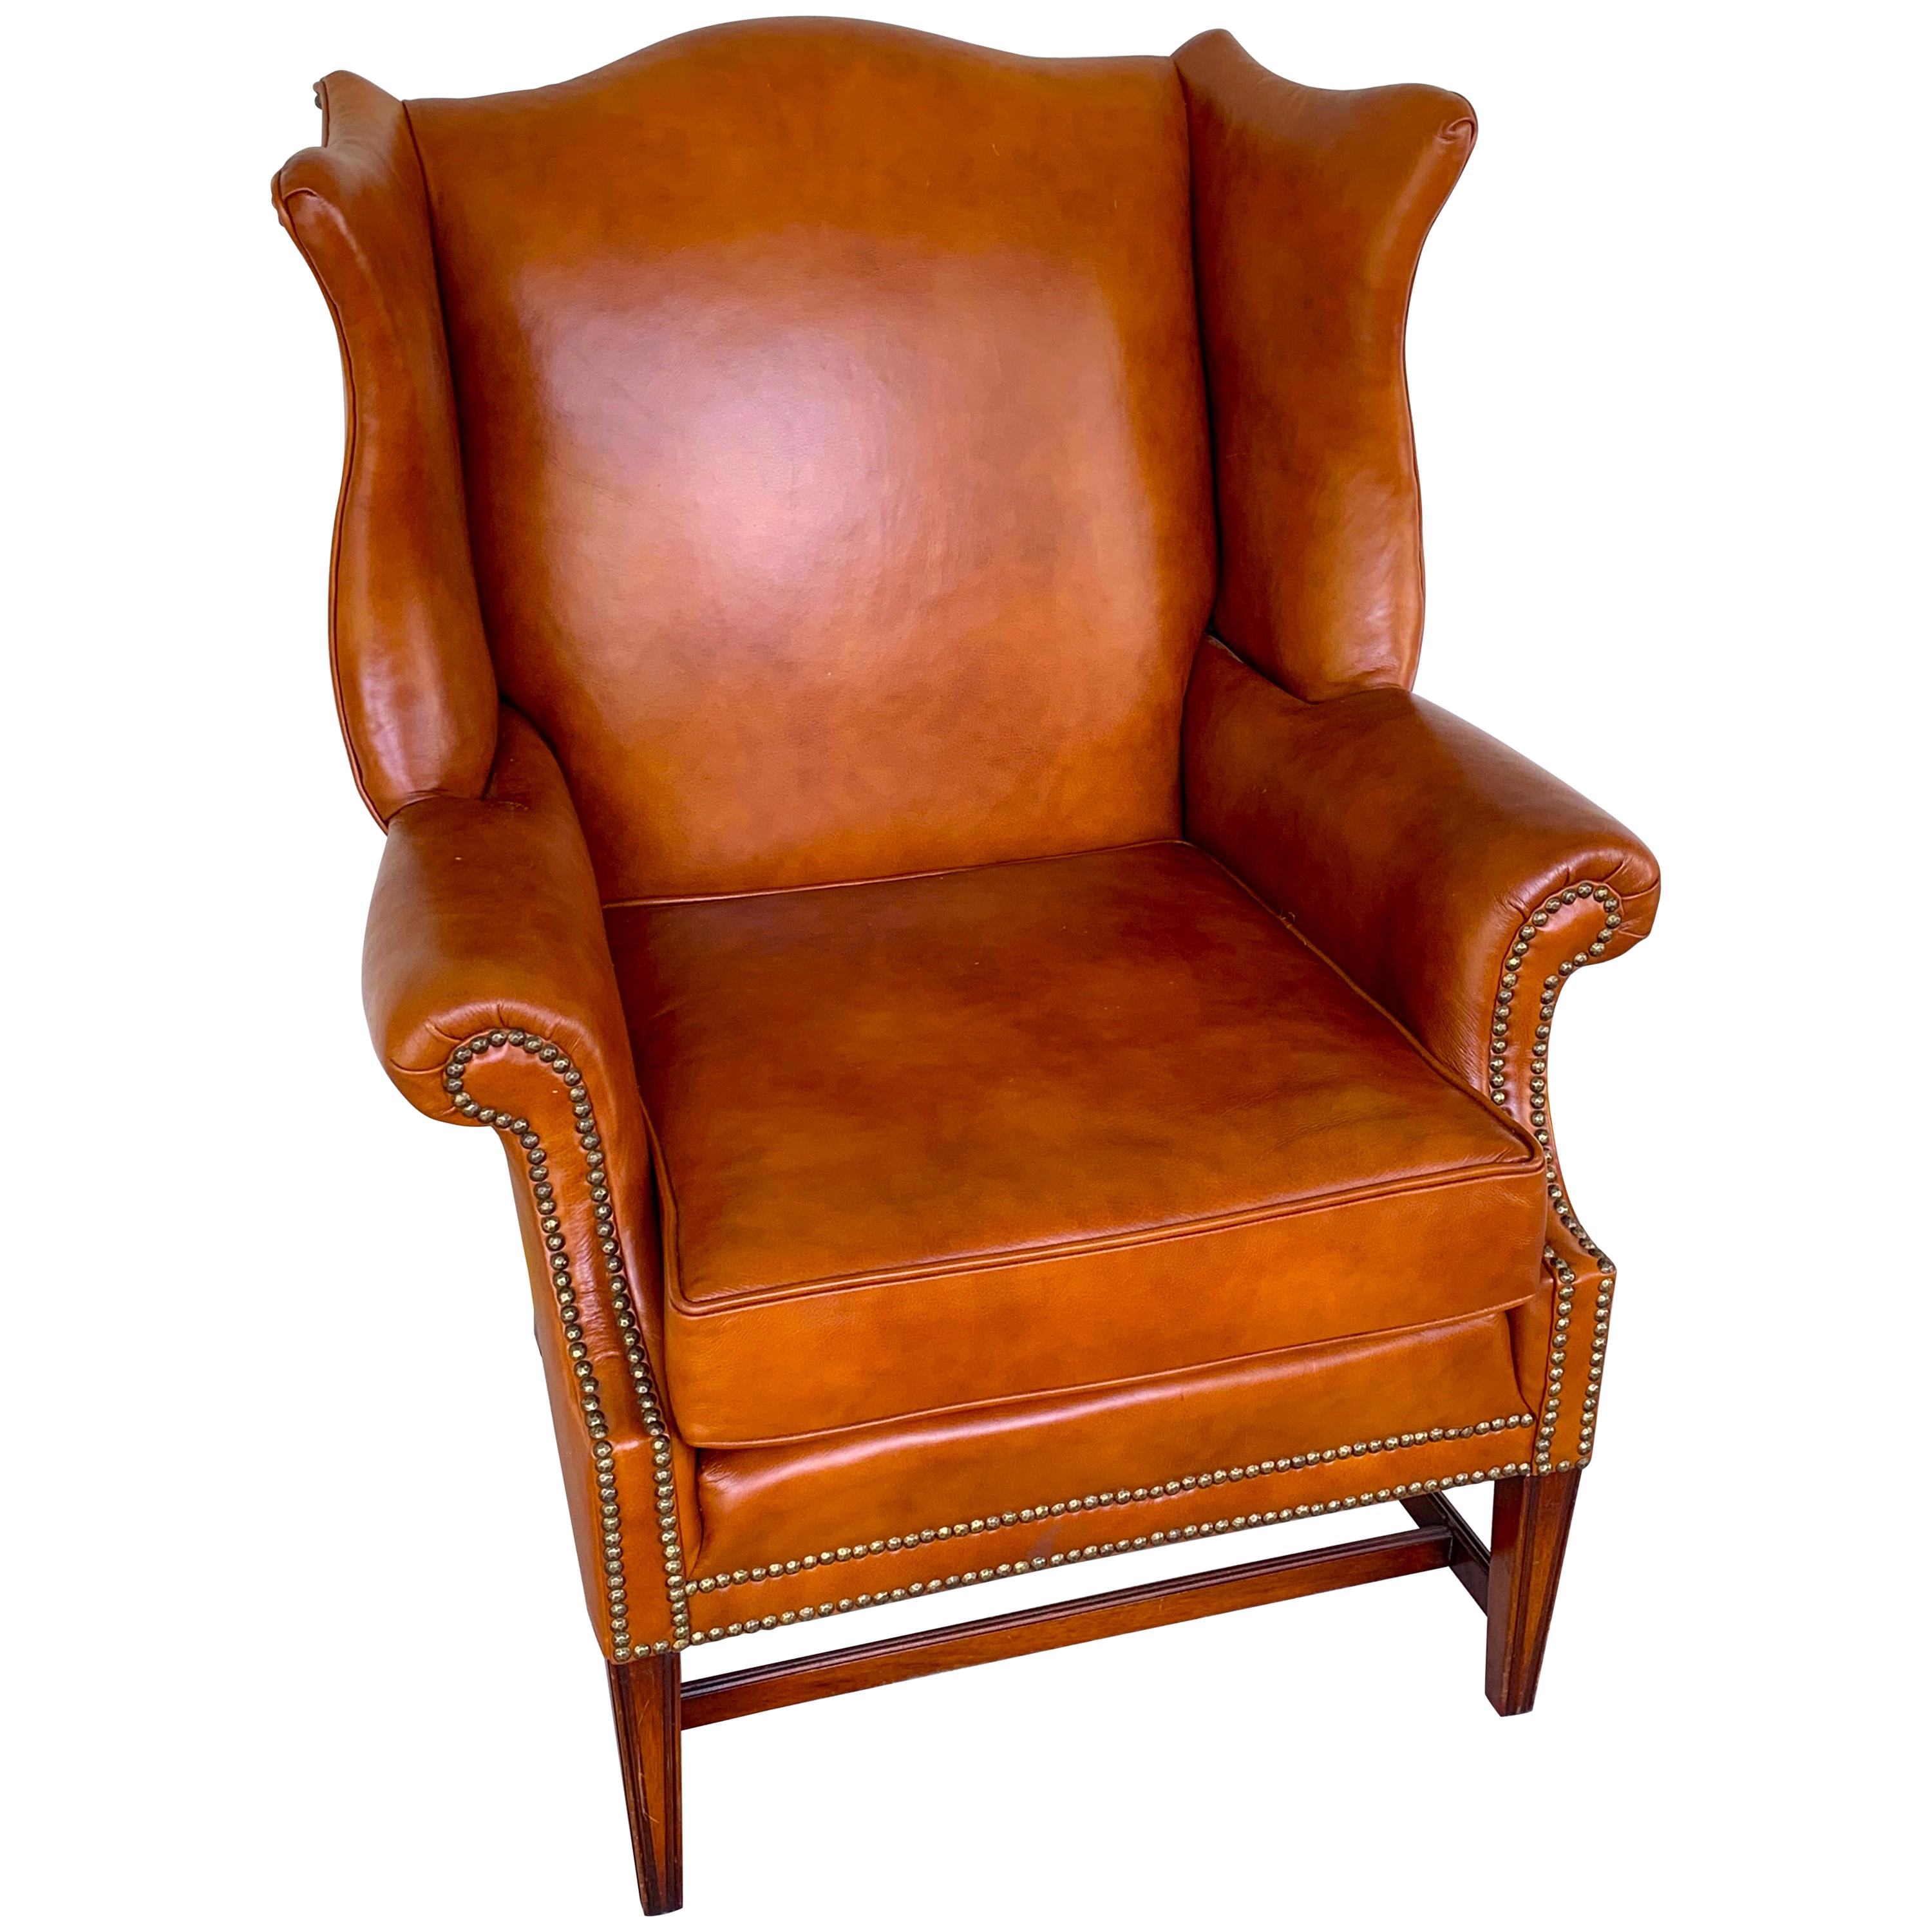 English Saddle Leather Mahogany Wingback Chair For Sale